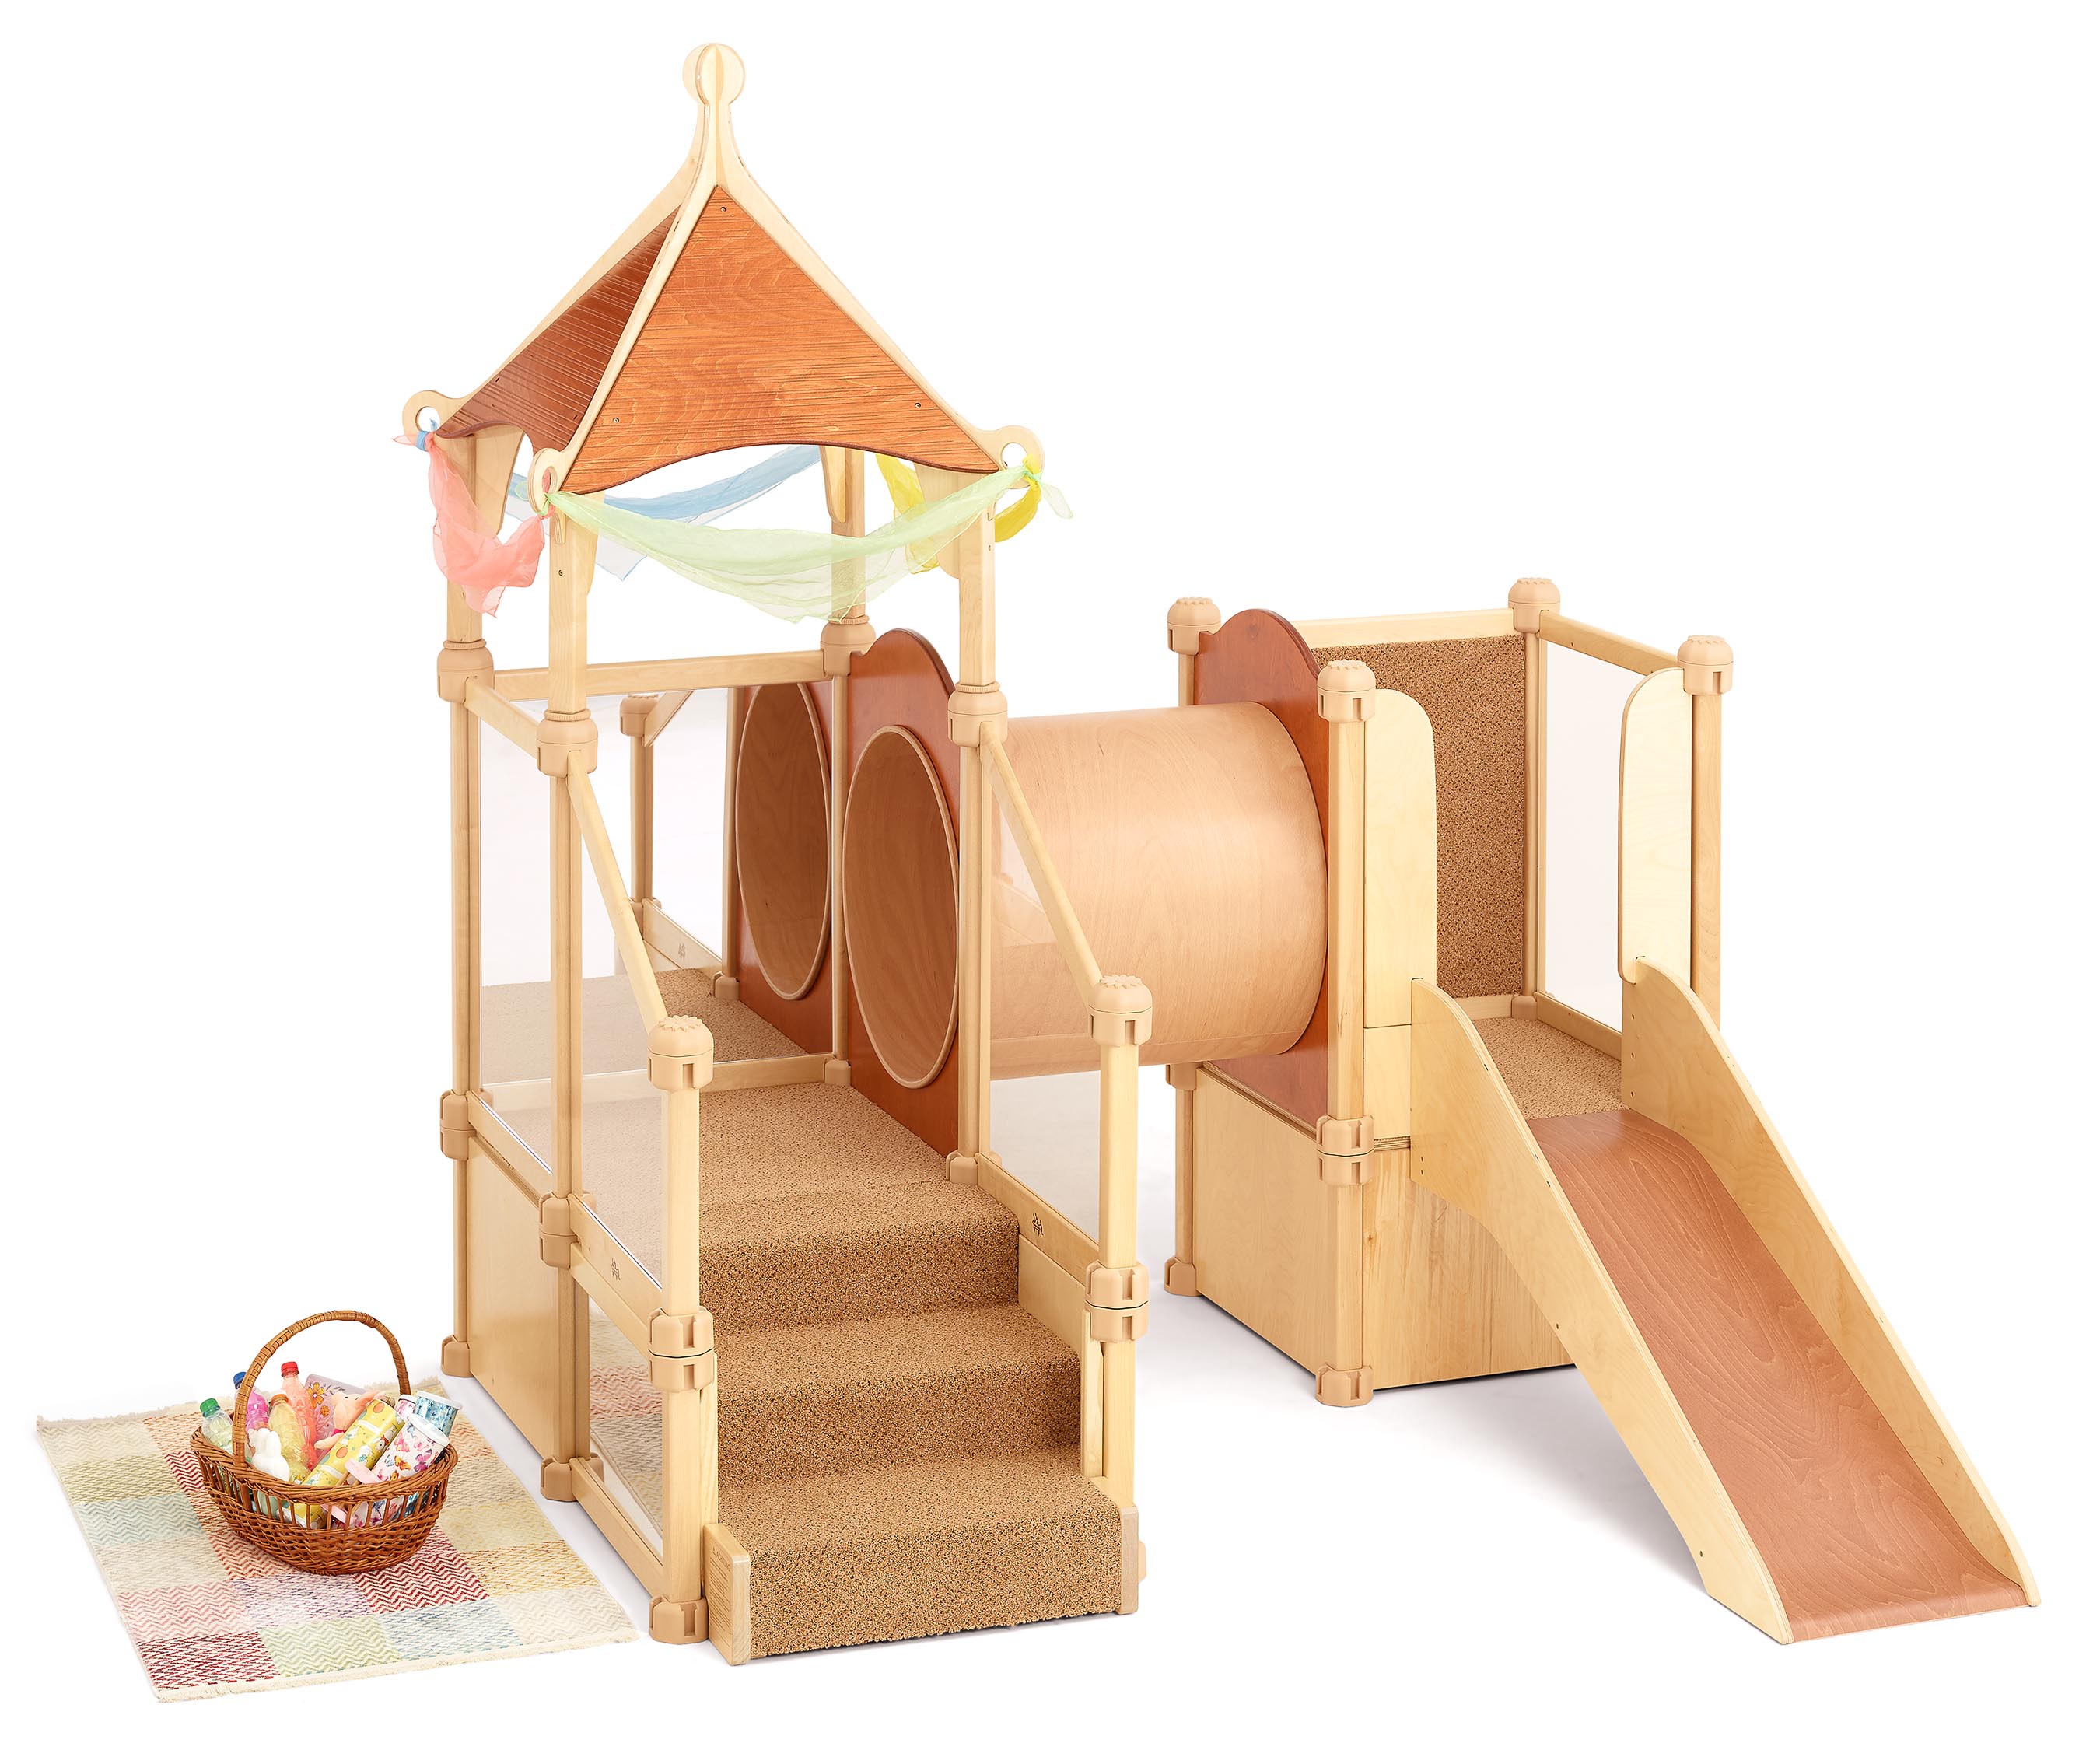 Gnome home with slide